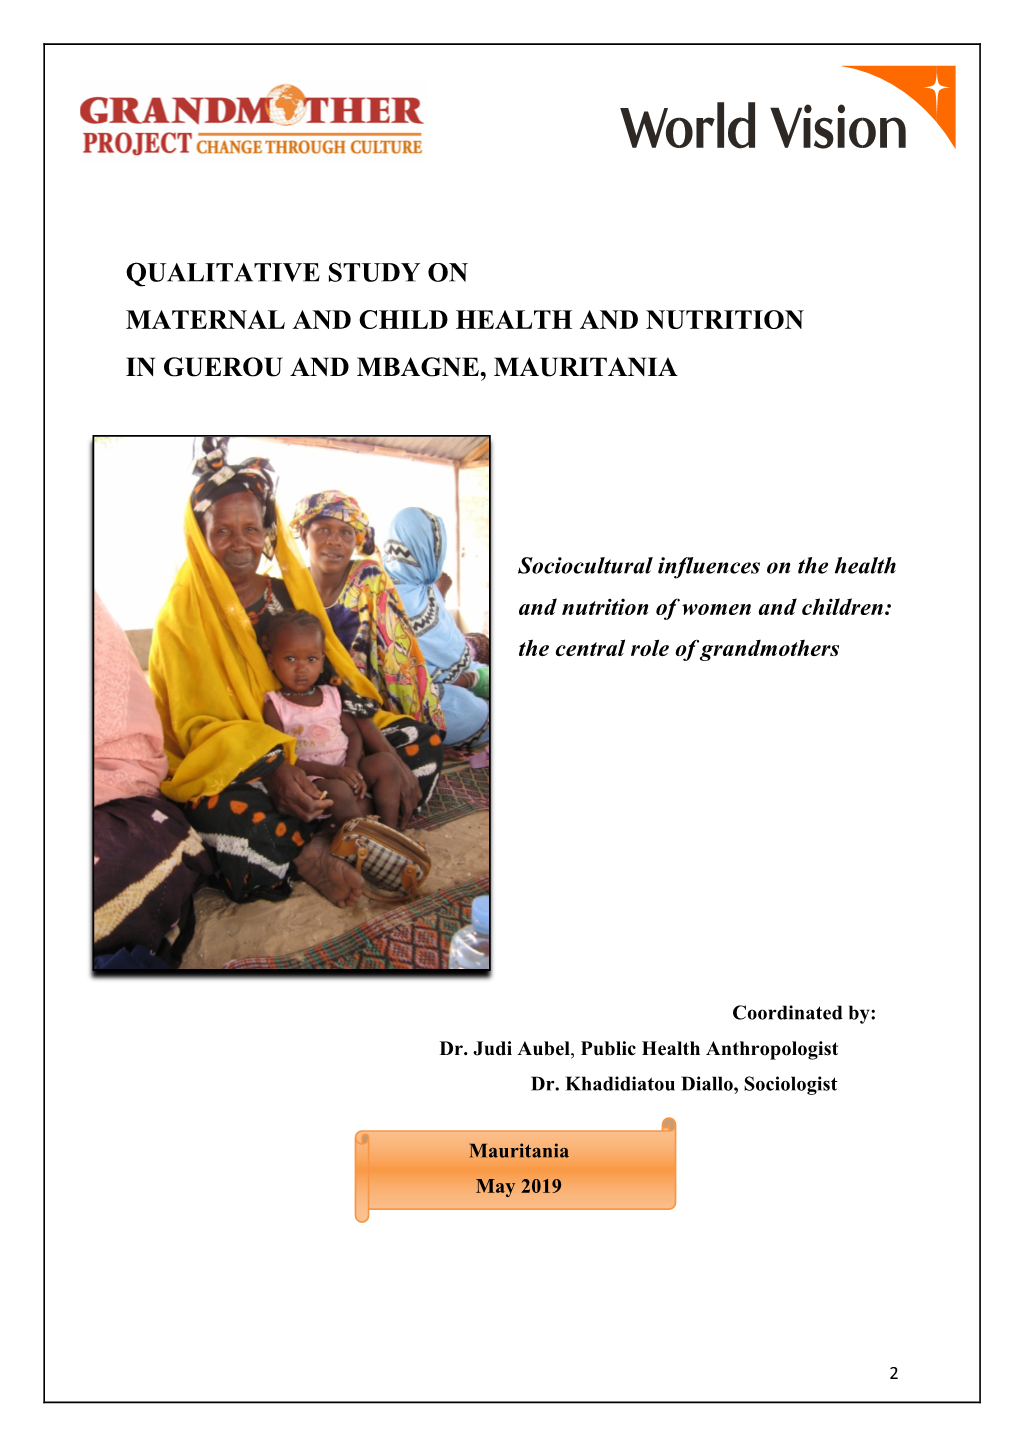 Qualitative Study on Maternal and Child Health and Nutrition in Guerou and Mbagne, Mauritania